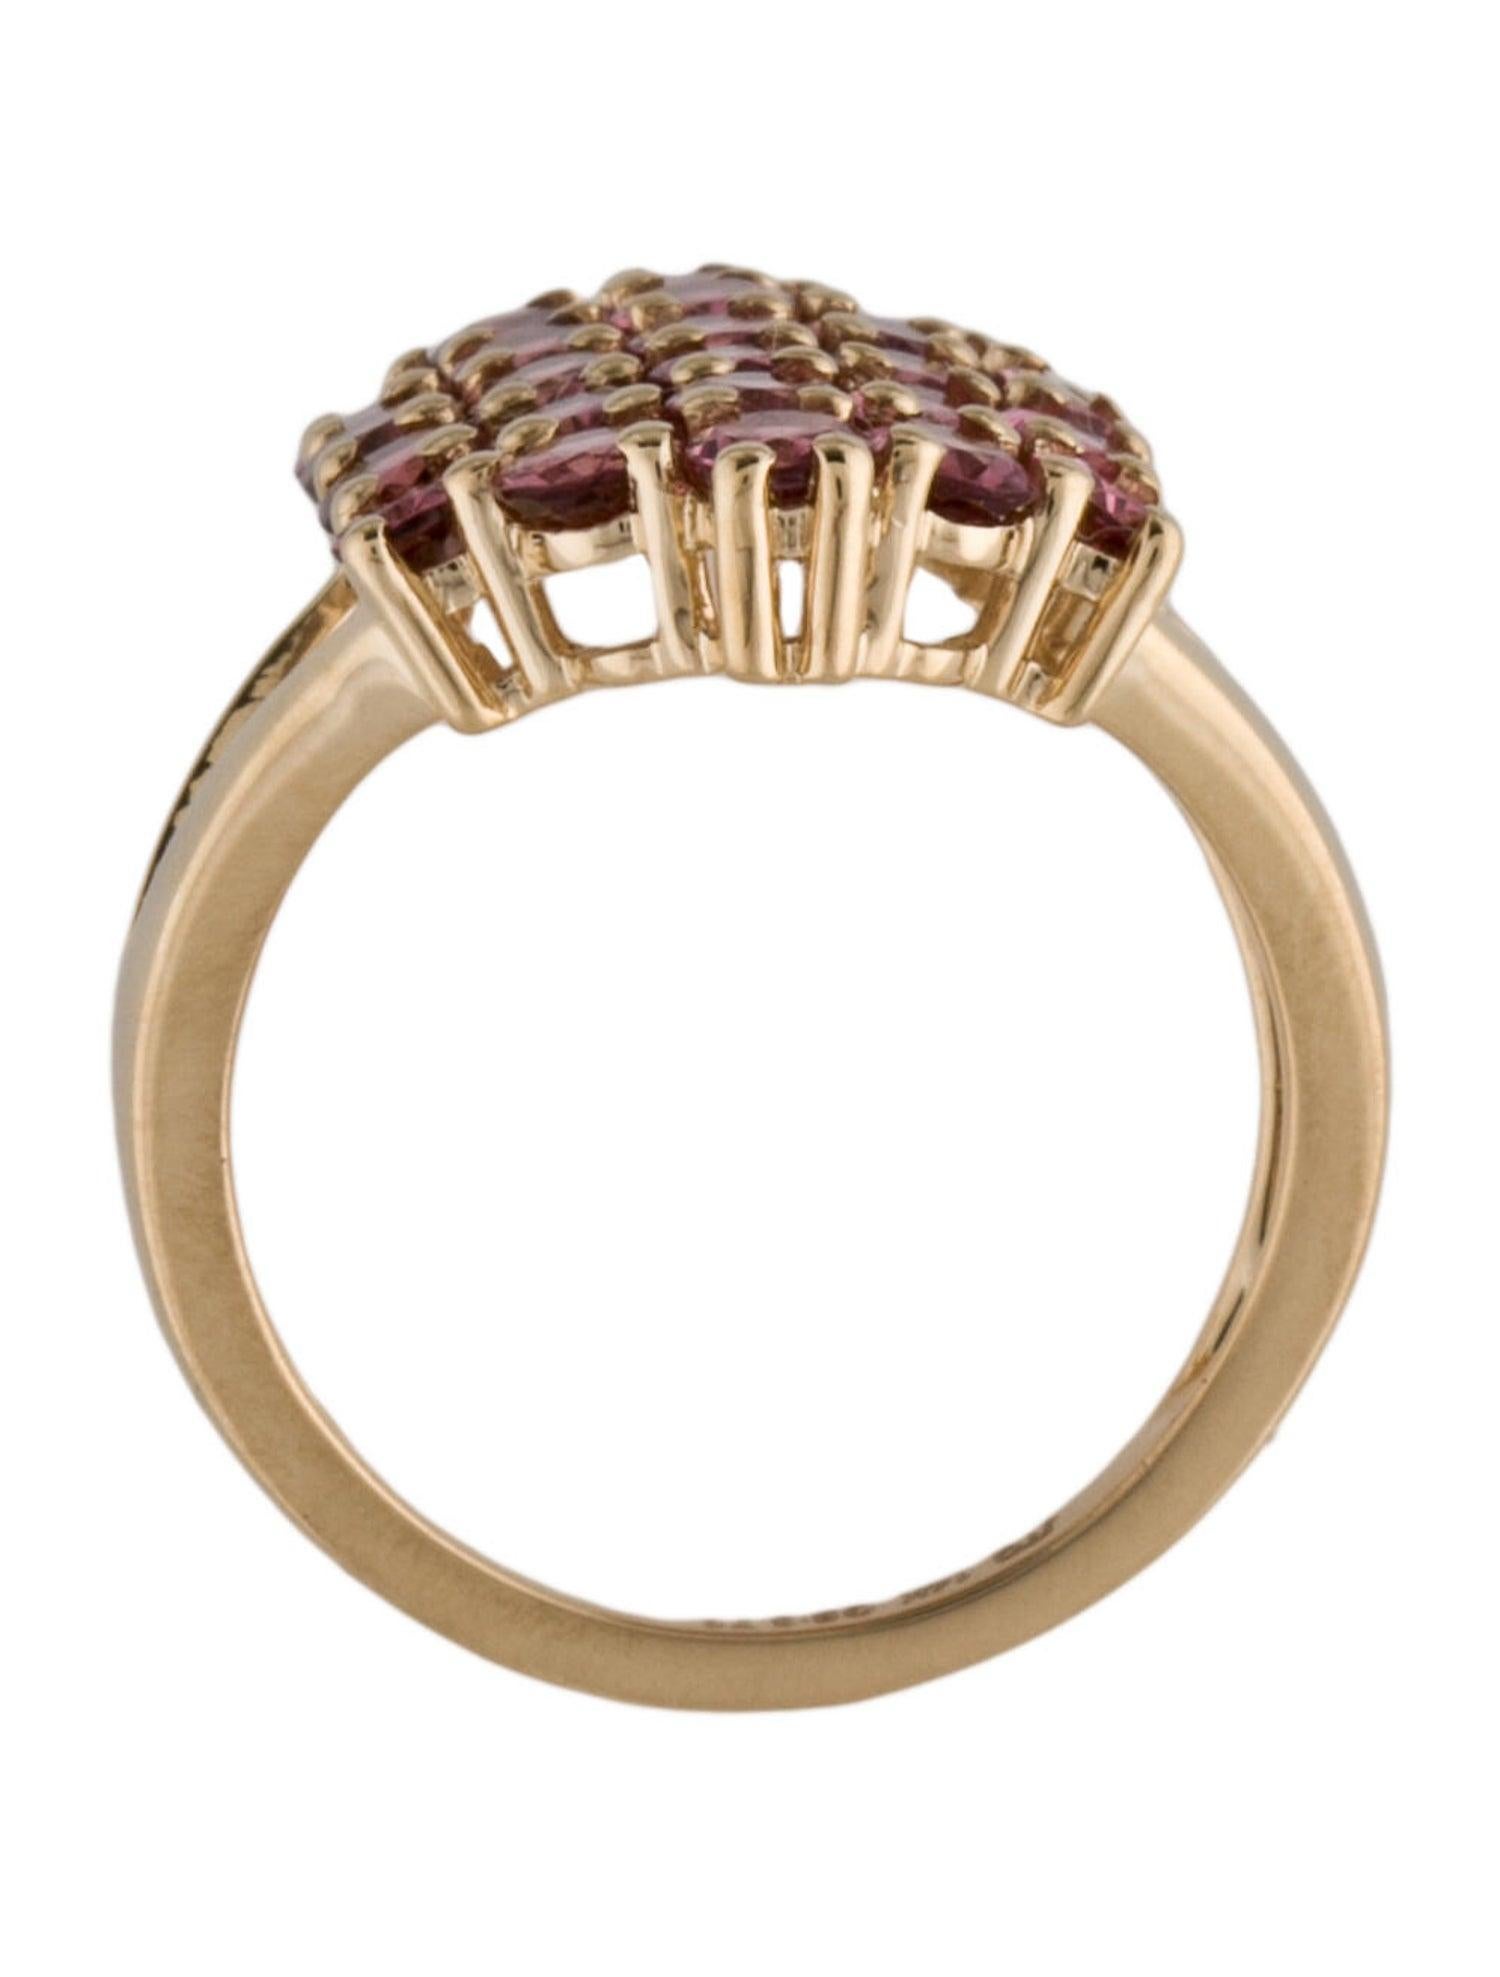 Elegant 14K Pink Tourmaline Cocktail Ring - Size 7  Vintage Gemstone Ring In New Condition For Sale In Holtsville, NY